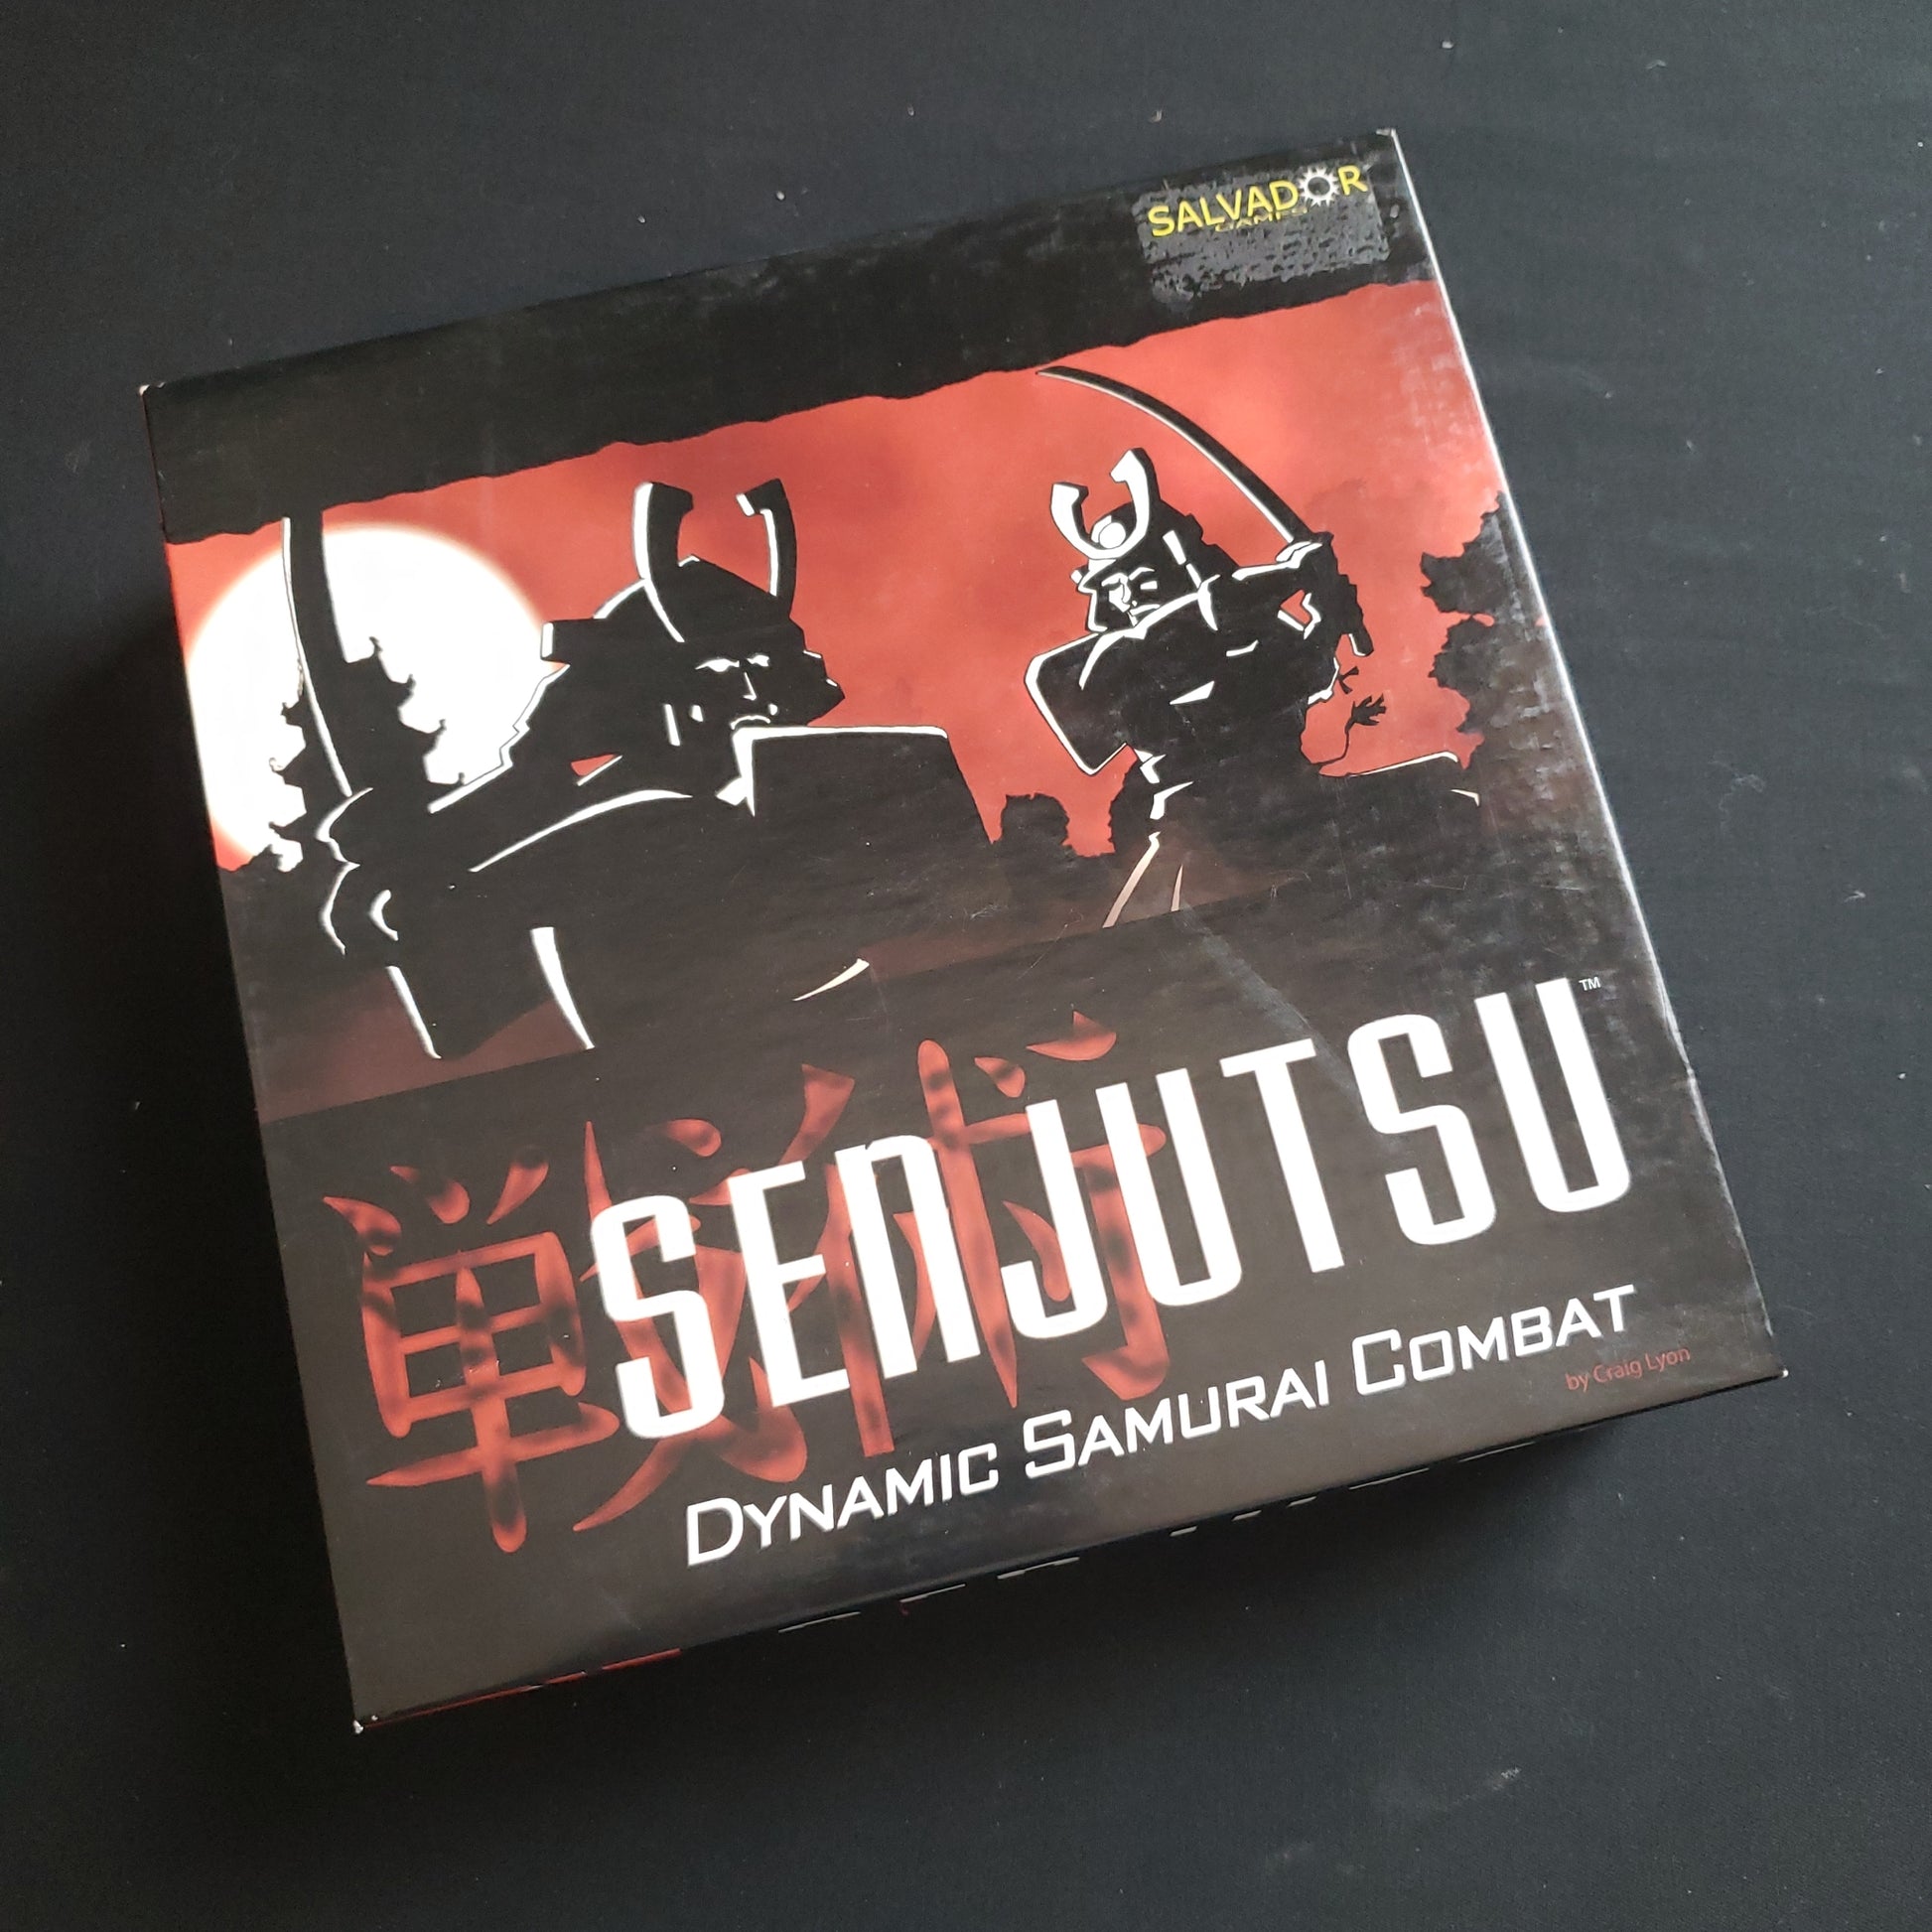 Image shows the front cover of the box of the Senjutsu: Dynamic Samurai Combat board game